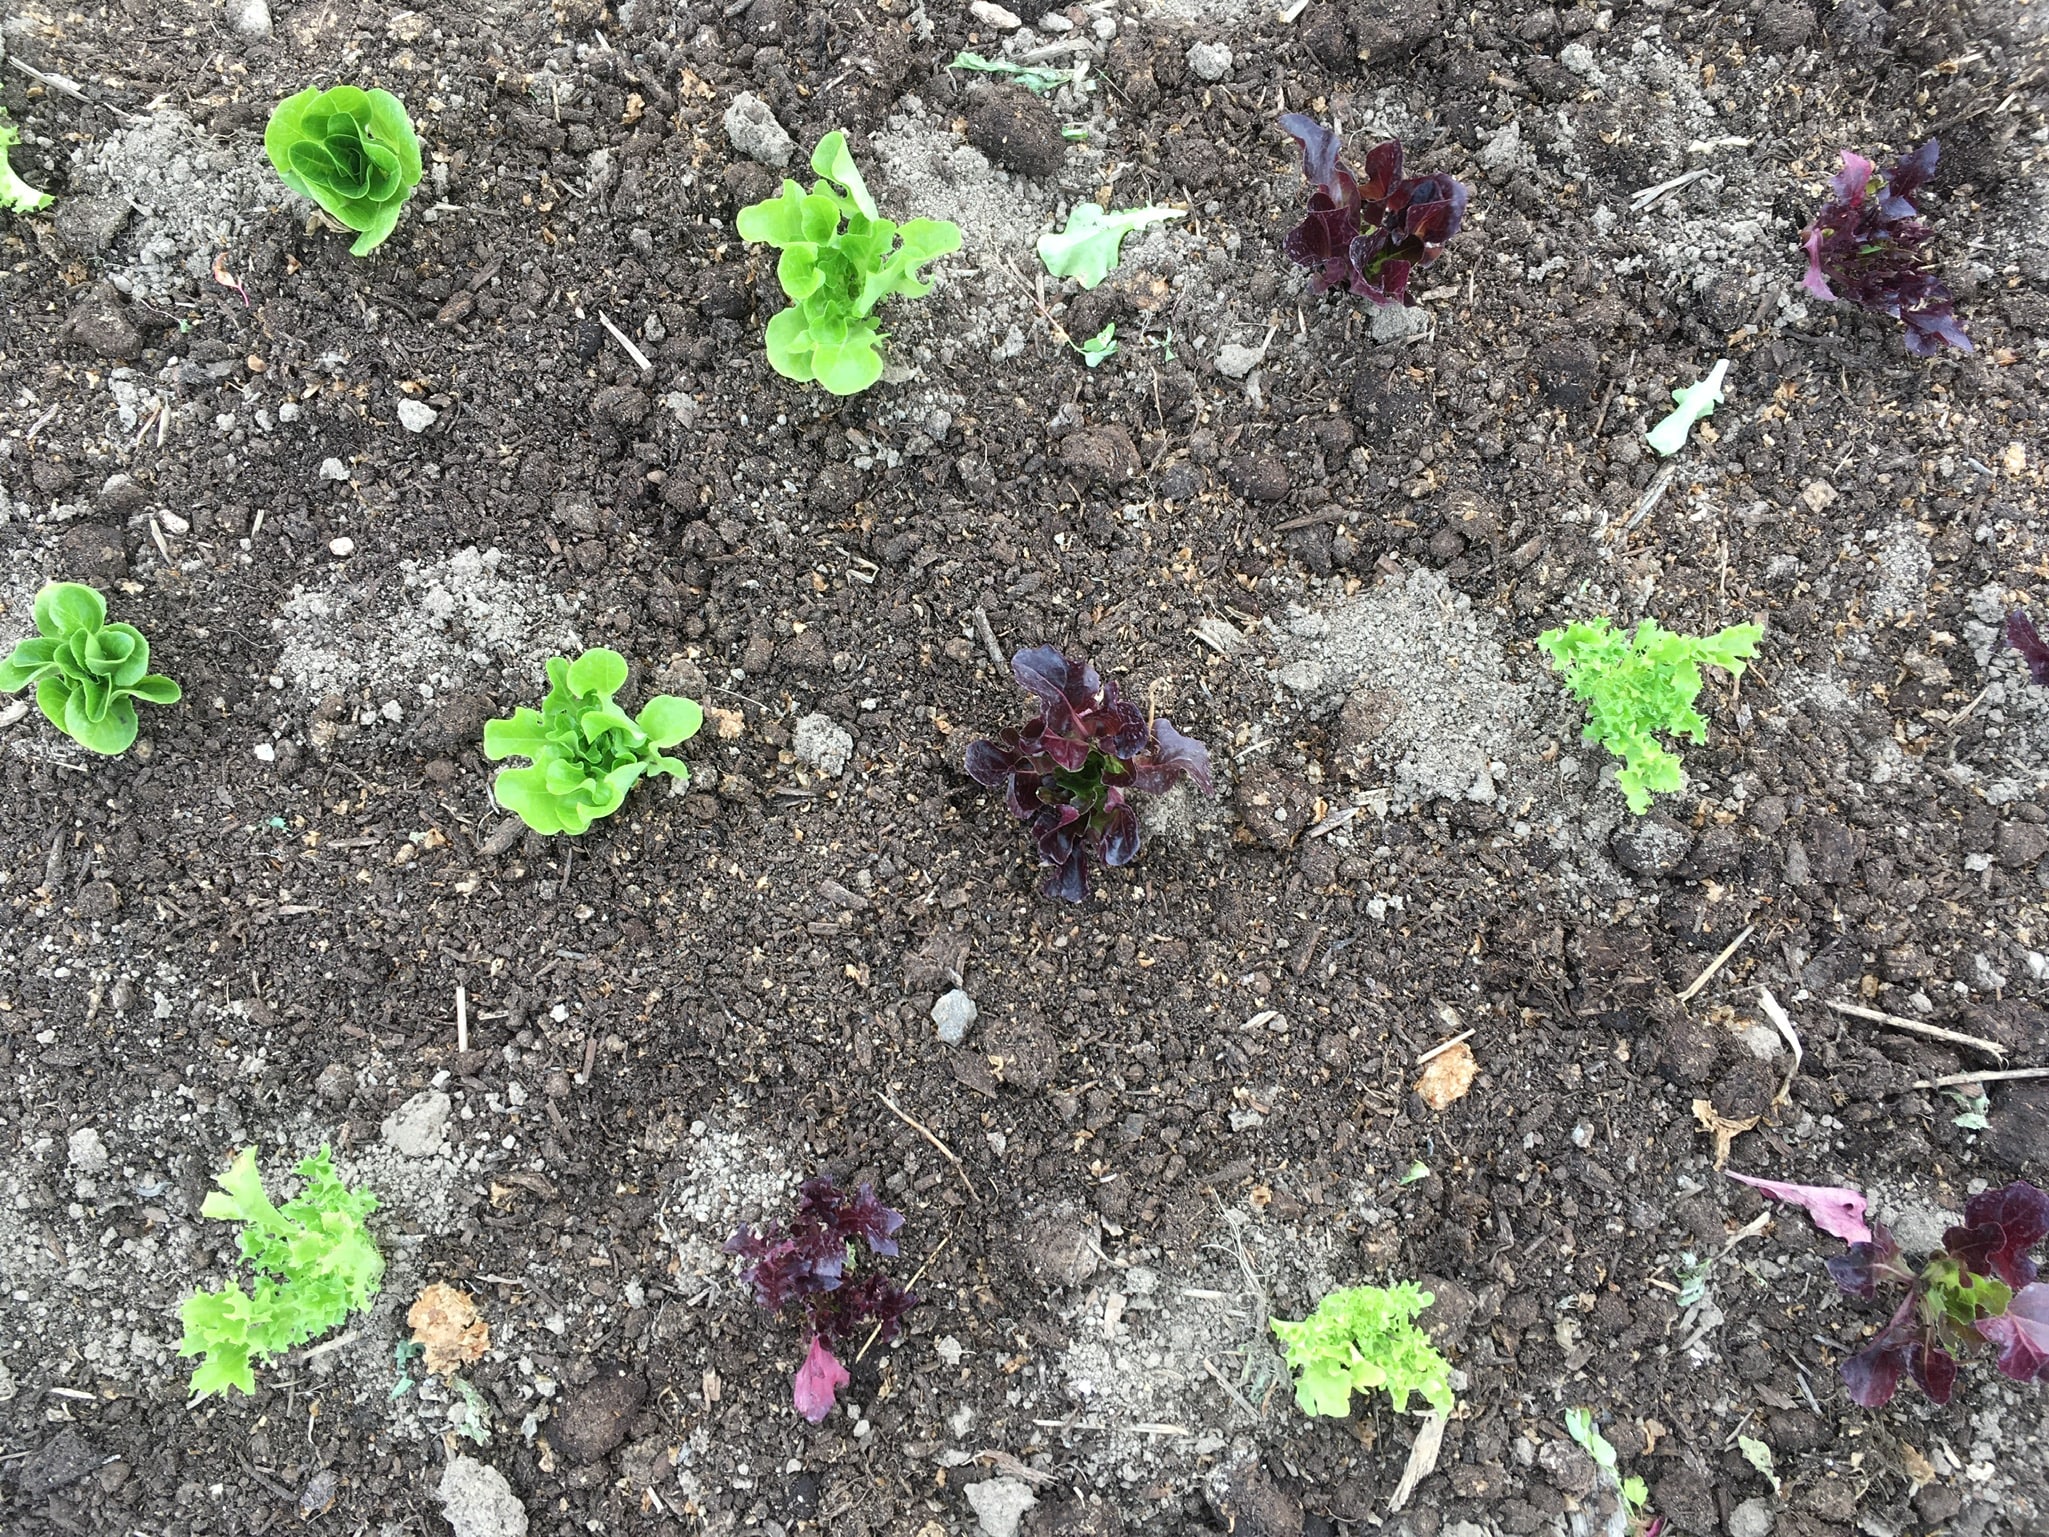 Salad in the Ground - CSA Week 3 and making a trip to Dufferin Grove